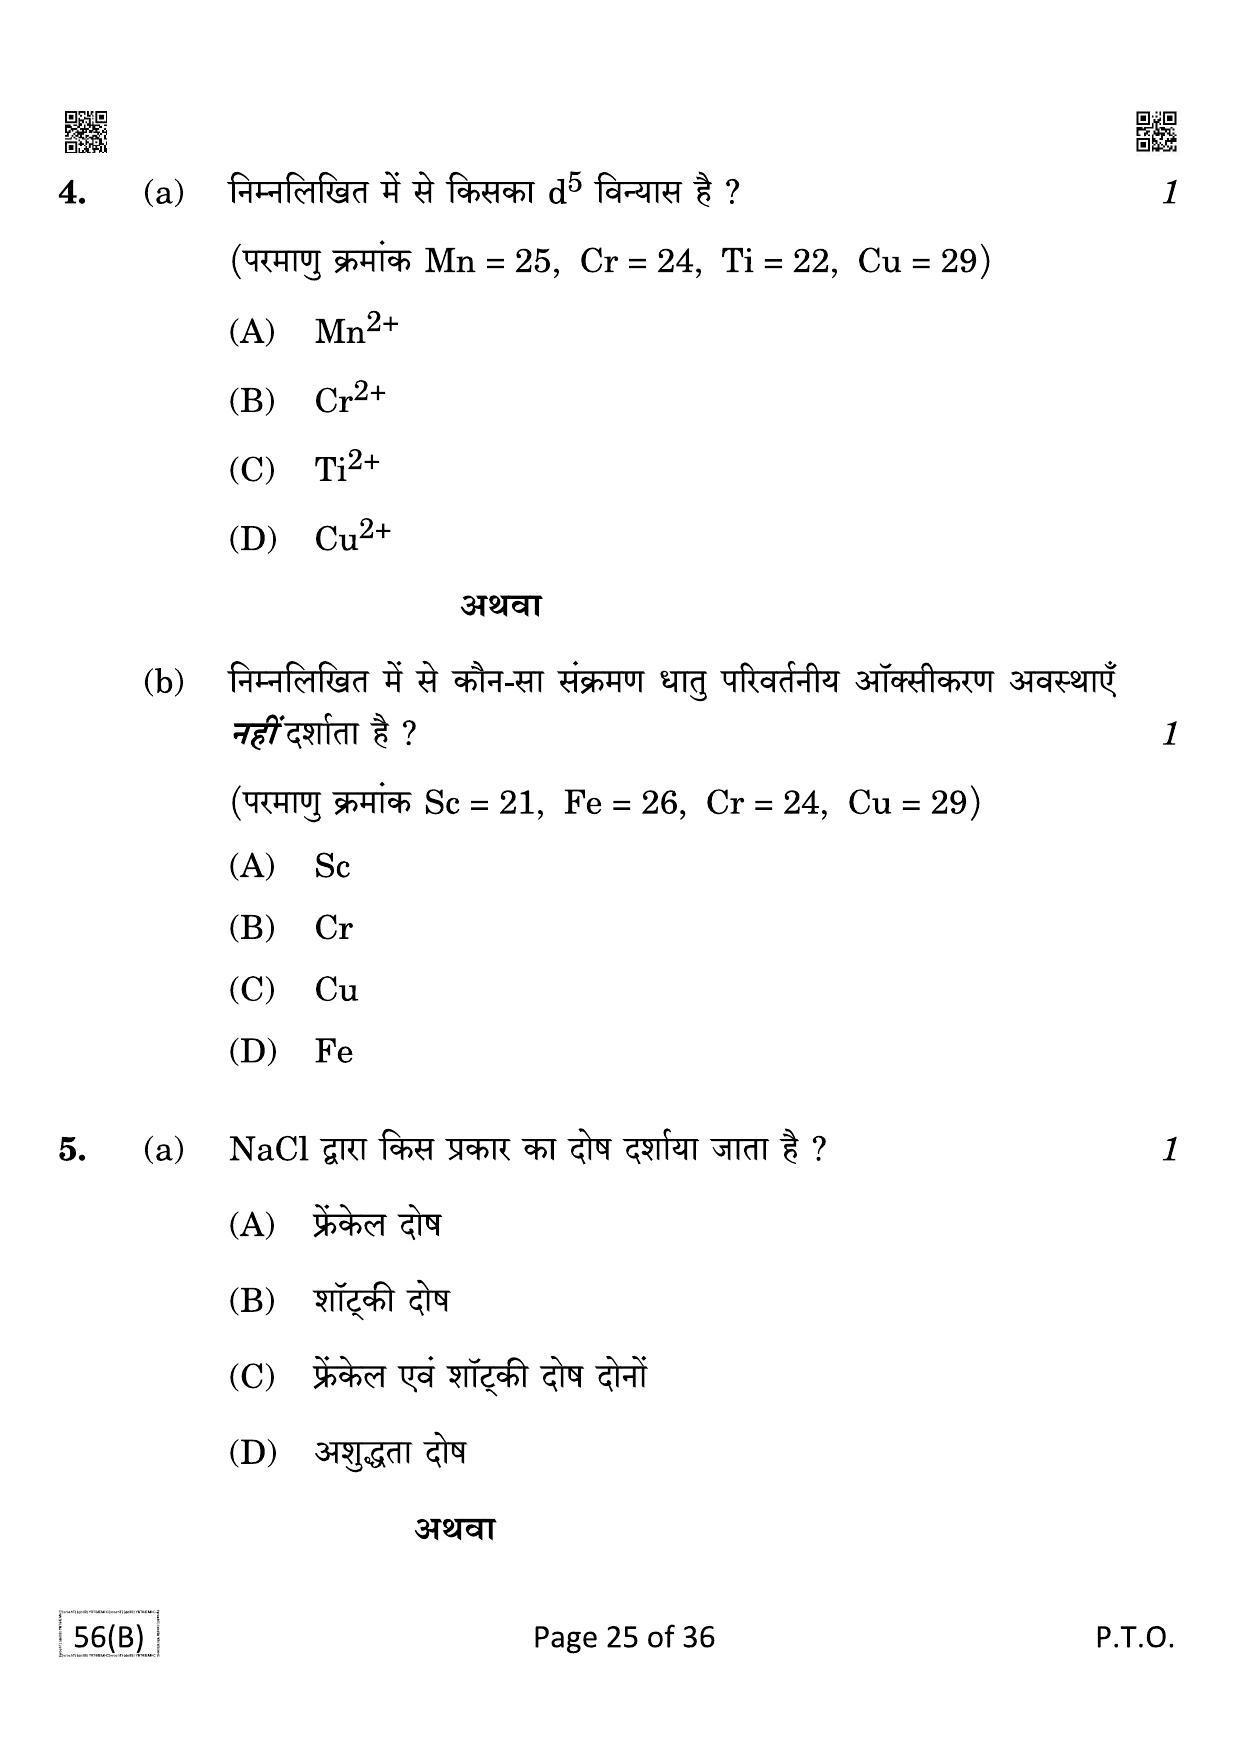 CBSE Class 12 QP_043_CHEMISTRY_FOR_BLIND_CANDIDATES 2021 Compartment Question Paper - Page 25